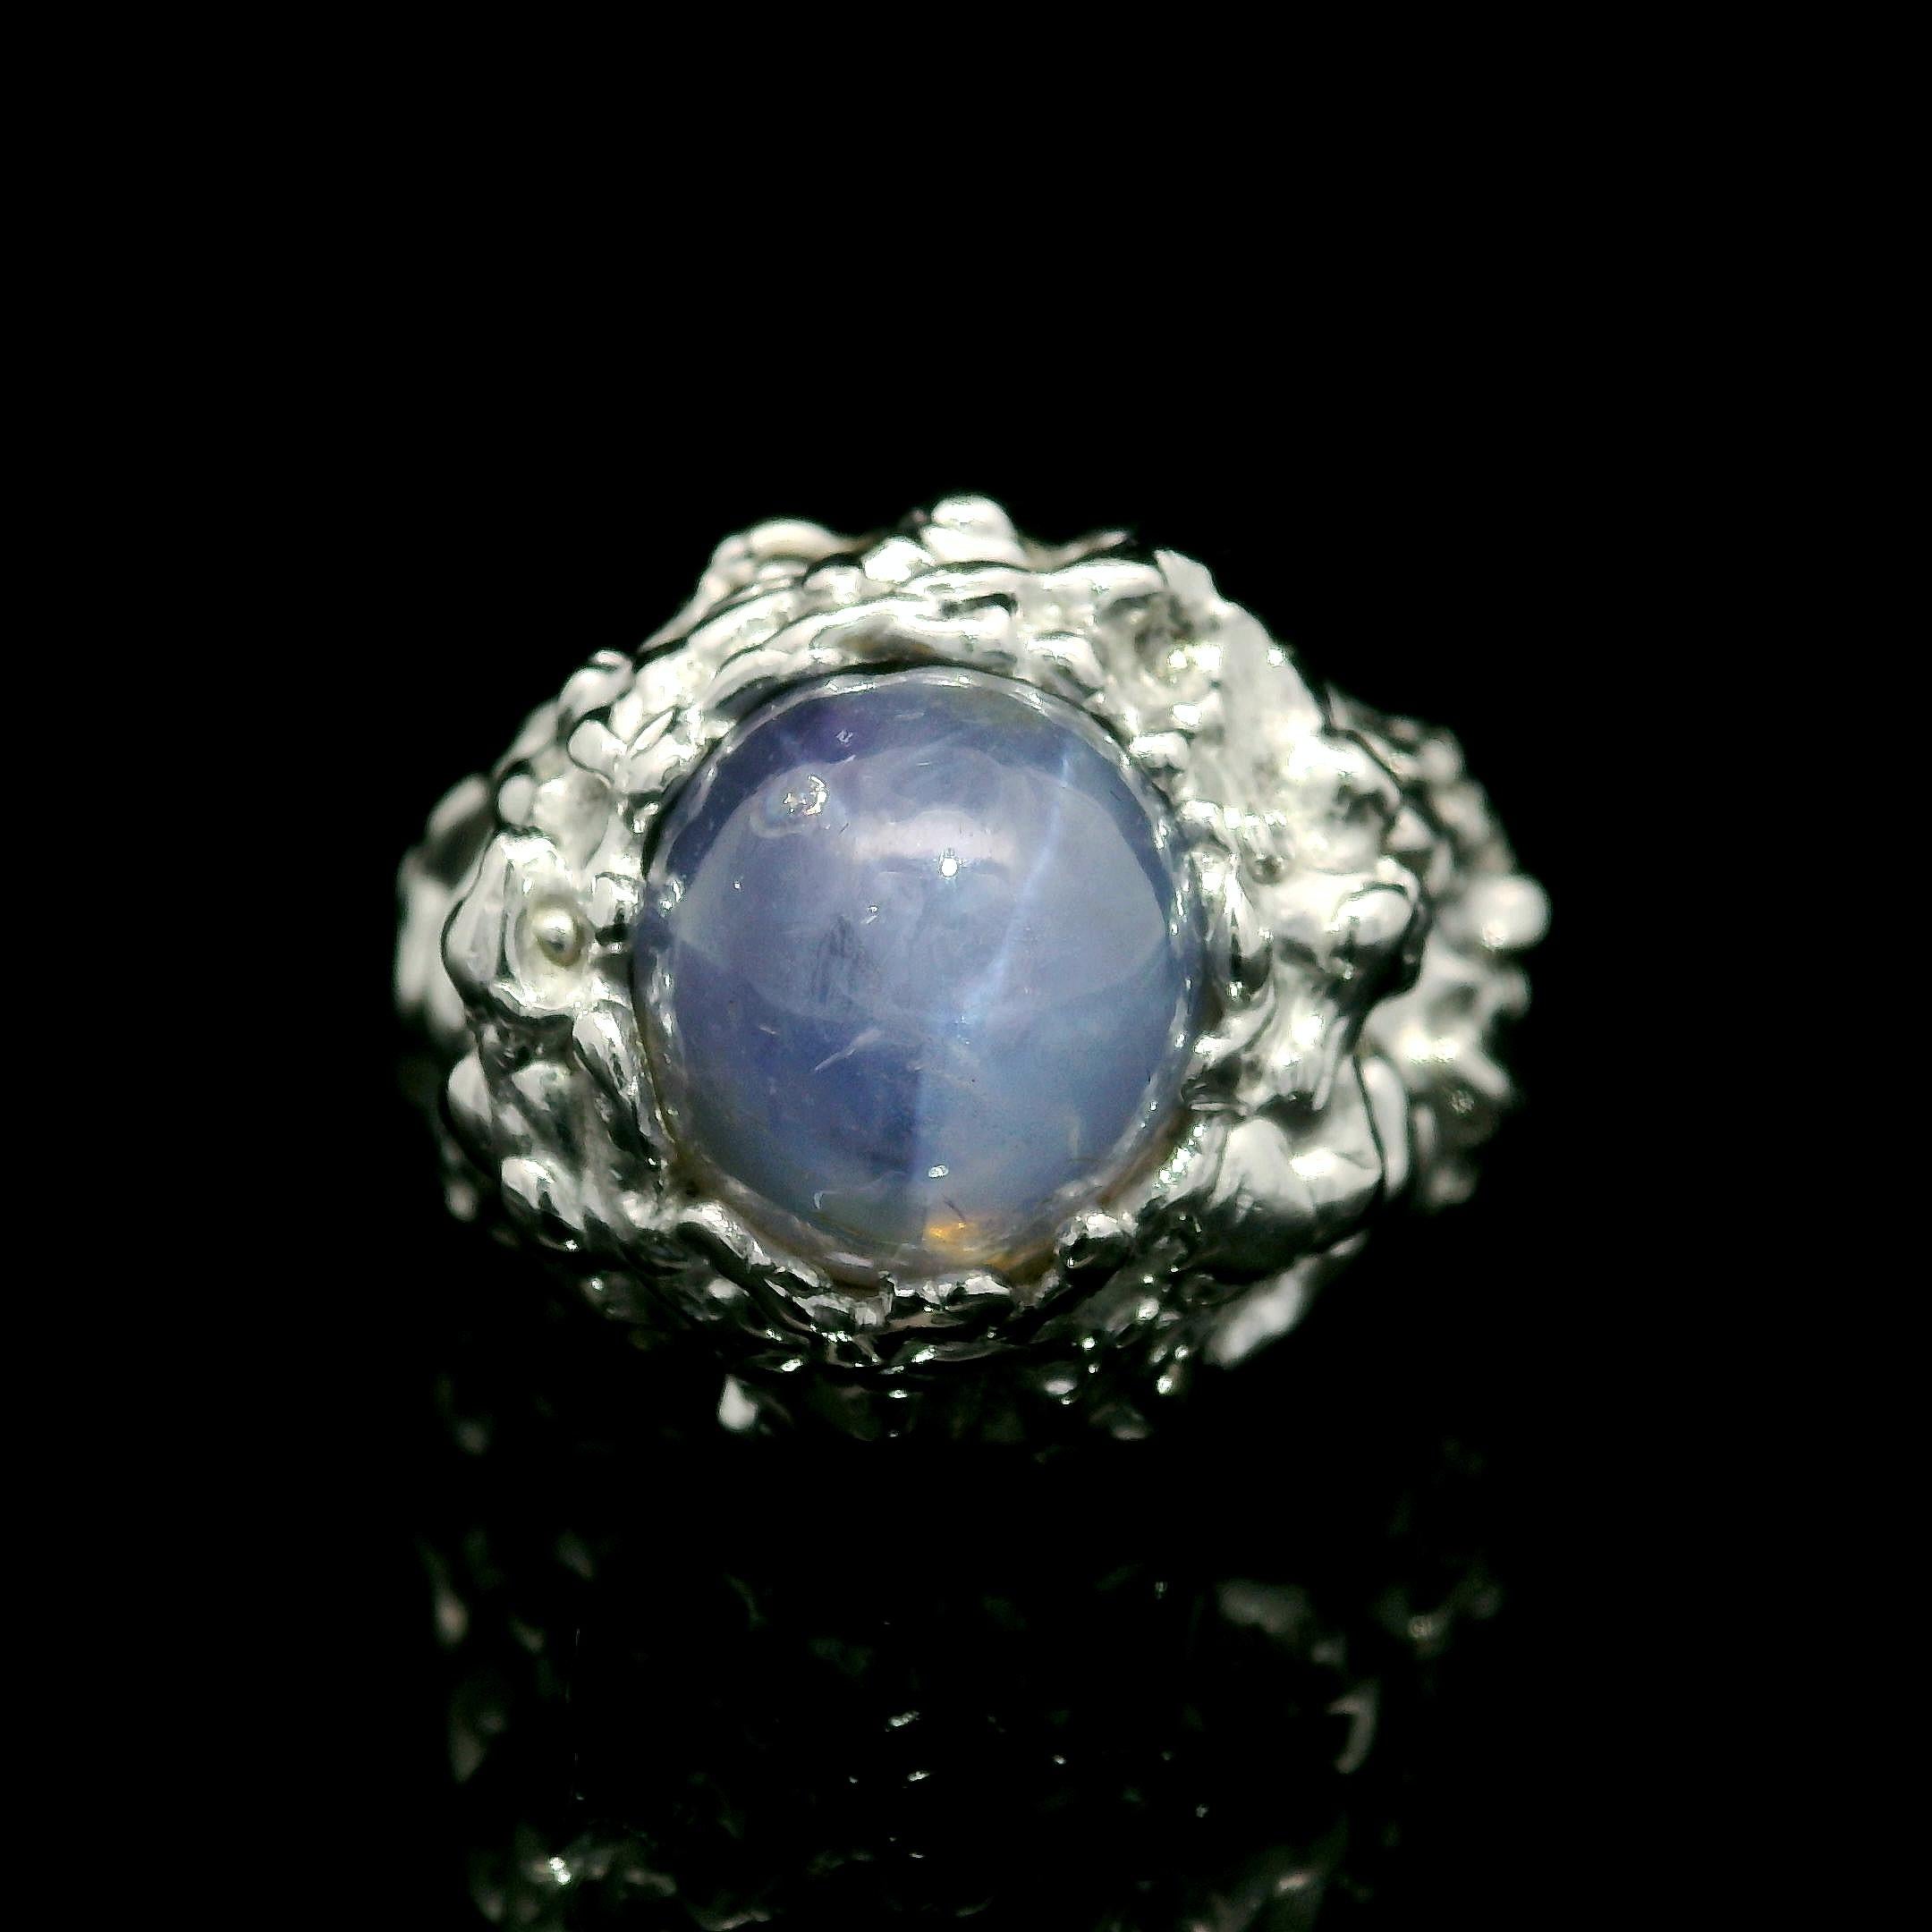 –Stone(s)–
(1) Natural Genuine Star Sapphire - Oval Cabochon - Prong Set - Light to Medium Blue Color  - Very Nice Star - 7ctw (approx.) - 9x8.61mm (approx.)
Material: Solid 14k White Gold
Weight: 14.26 Grams
Ring Size: 6.5 ( fitted on finger, item